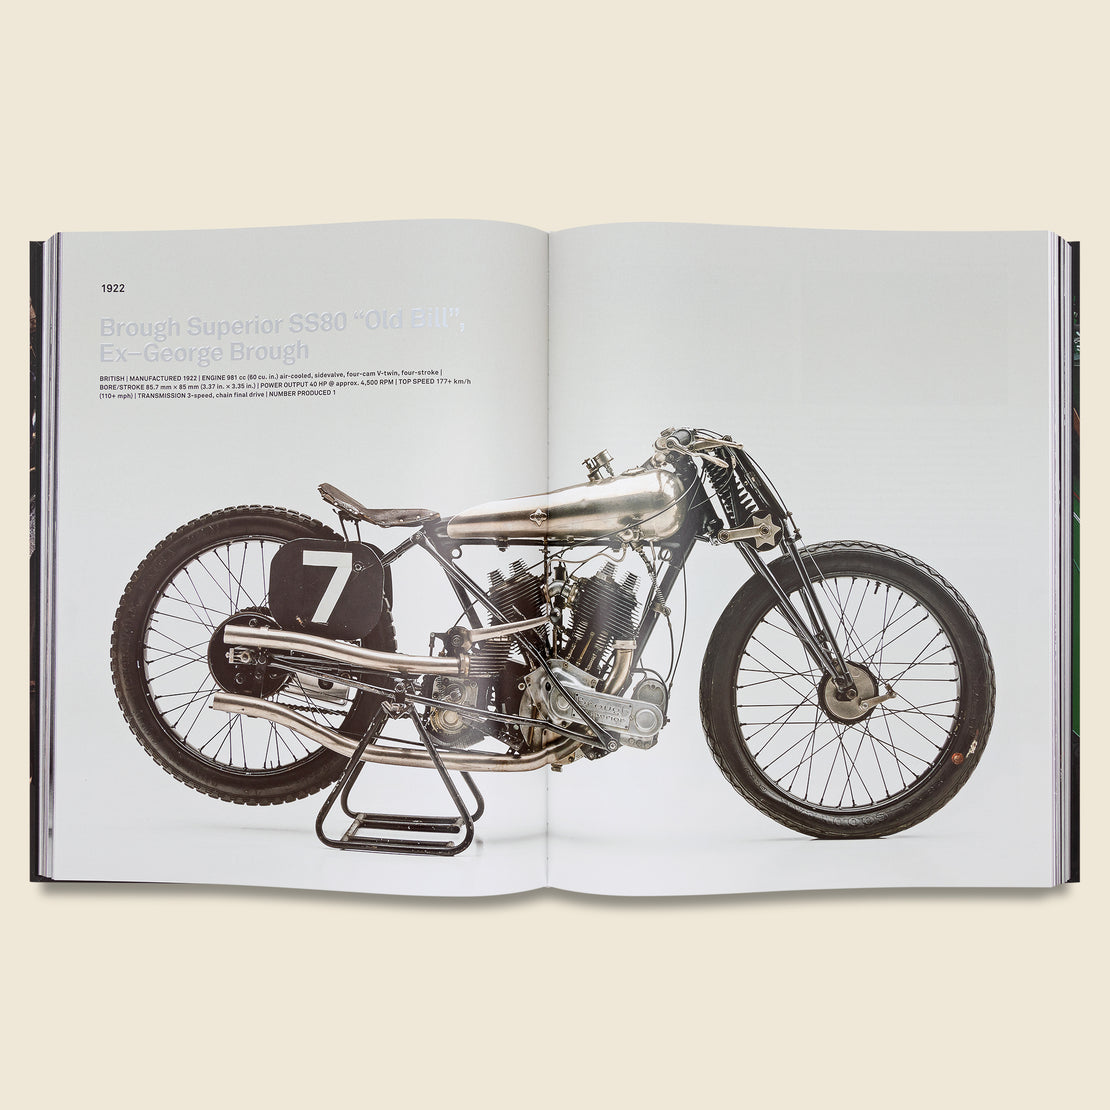 Ultimate Motorcycles - Bookstore - STAG Provisions - Home - Library - Book